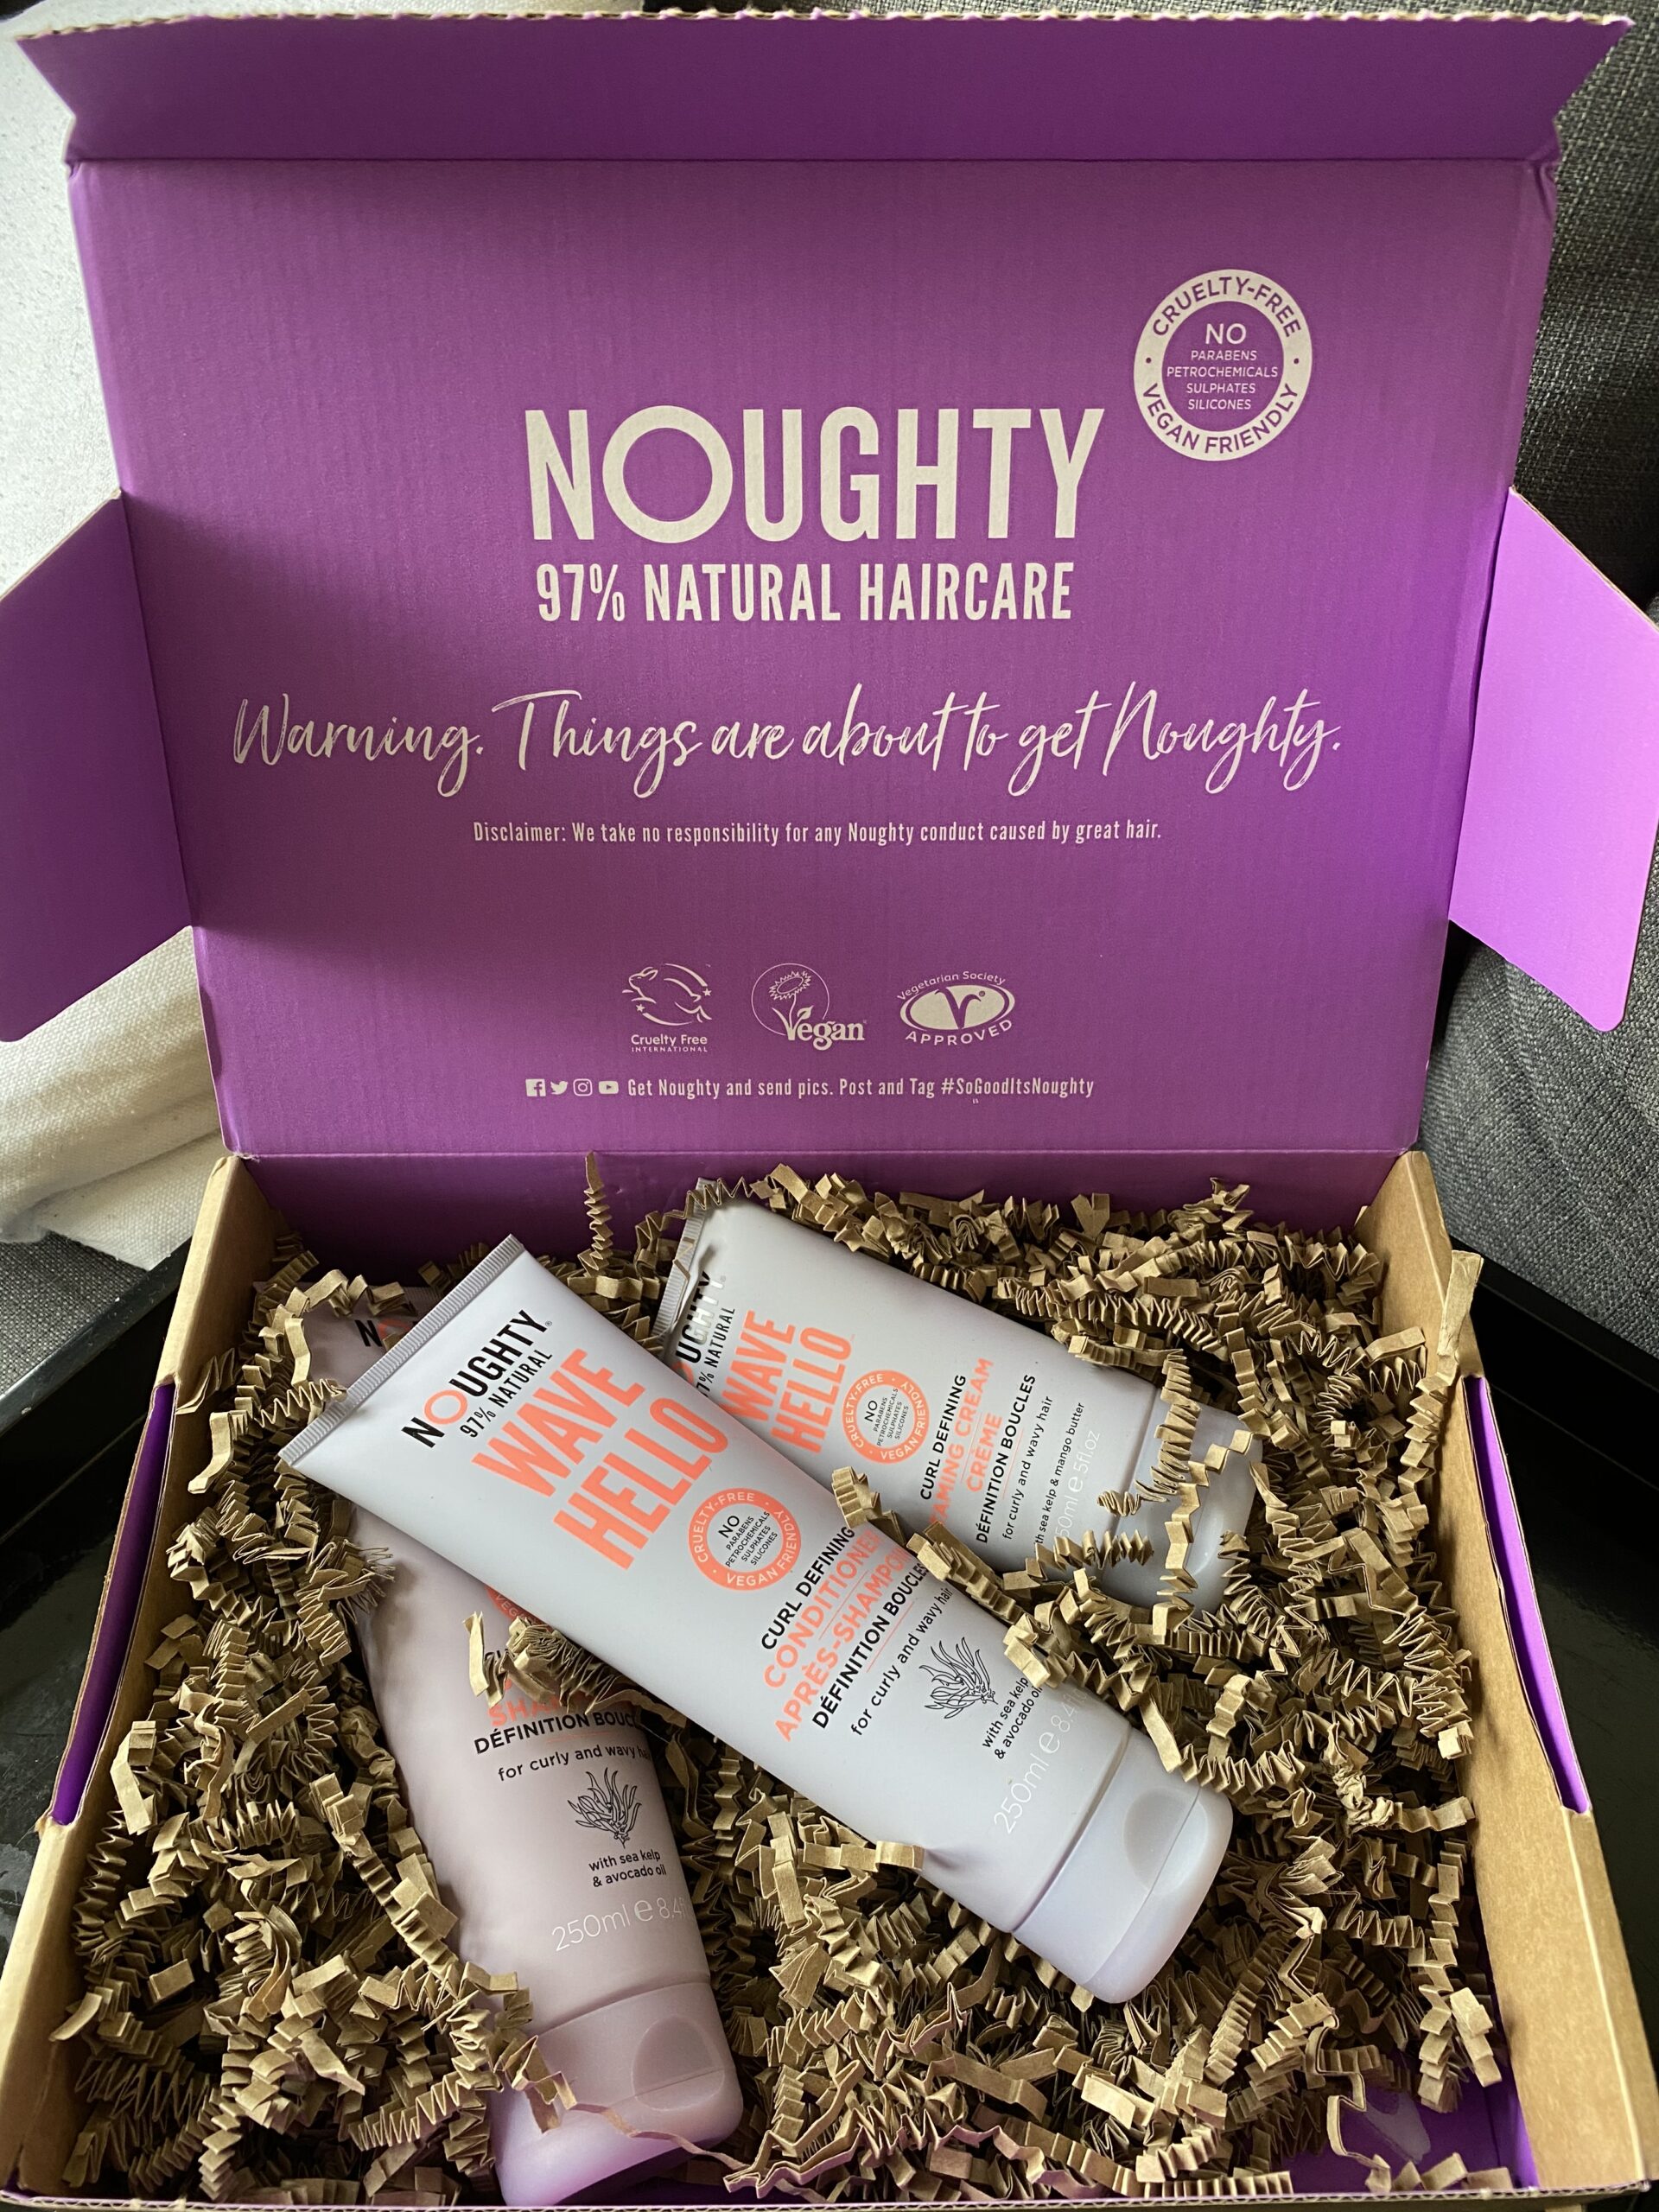 Box of Noughty haircare products - three tubes